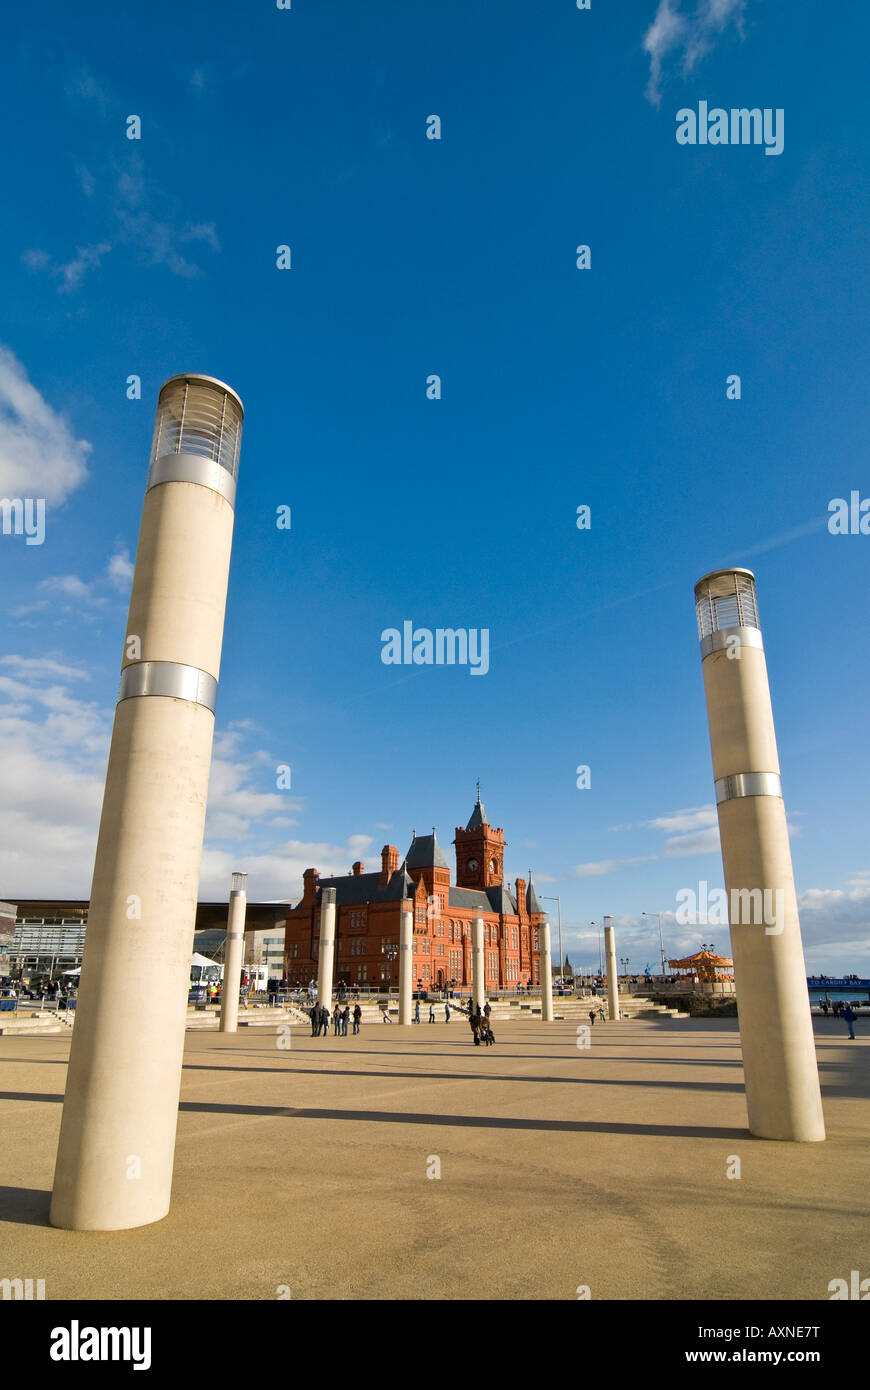 Vertical wide angle of the distinctive Pierhead Building from Roald Dahl Plass in Cardiff Bay on a bright sunny day Stock Photo